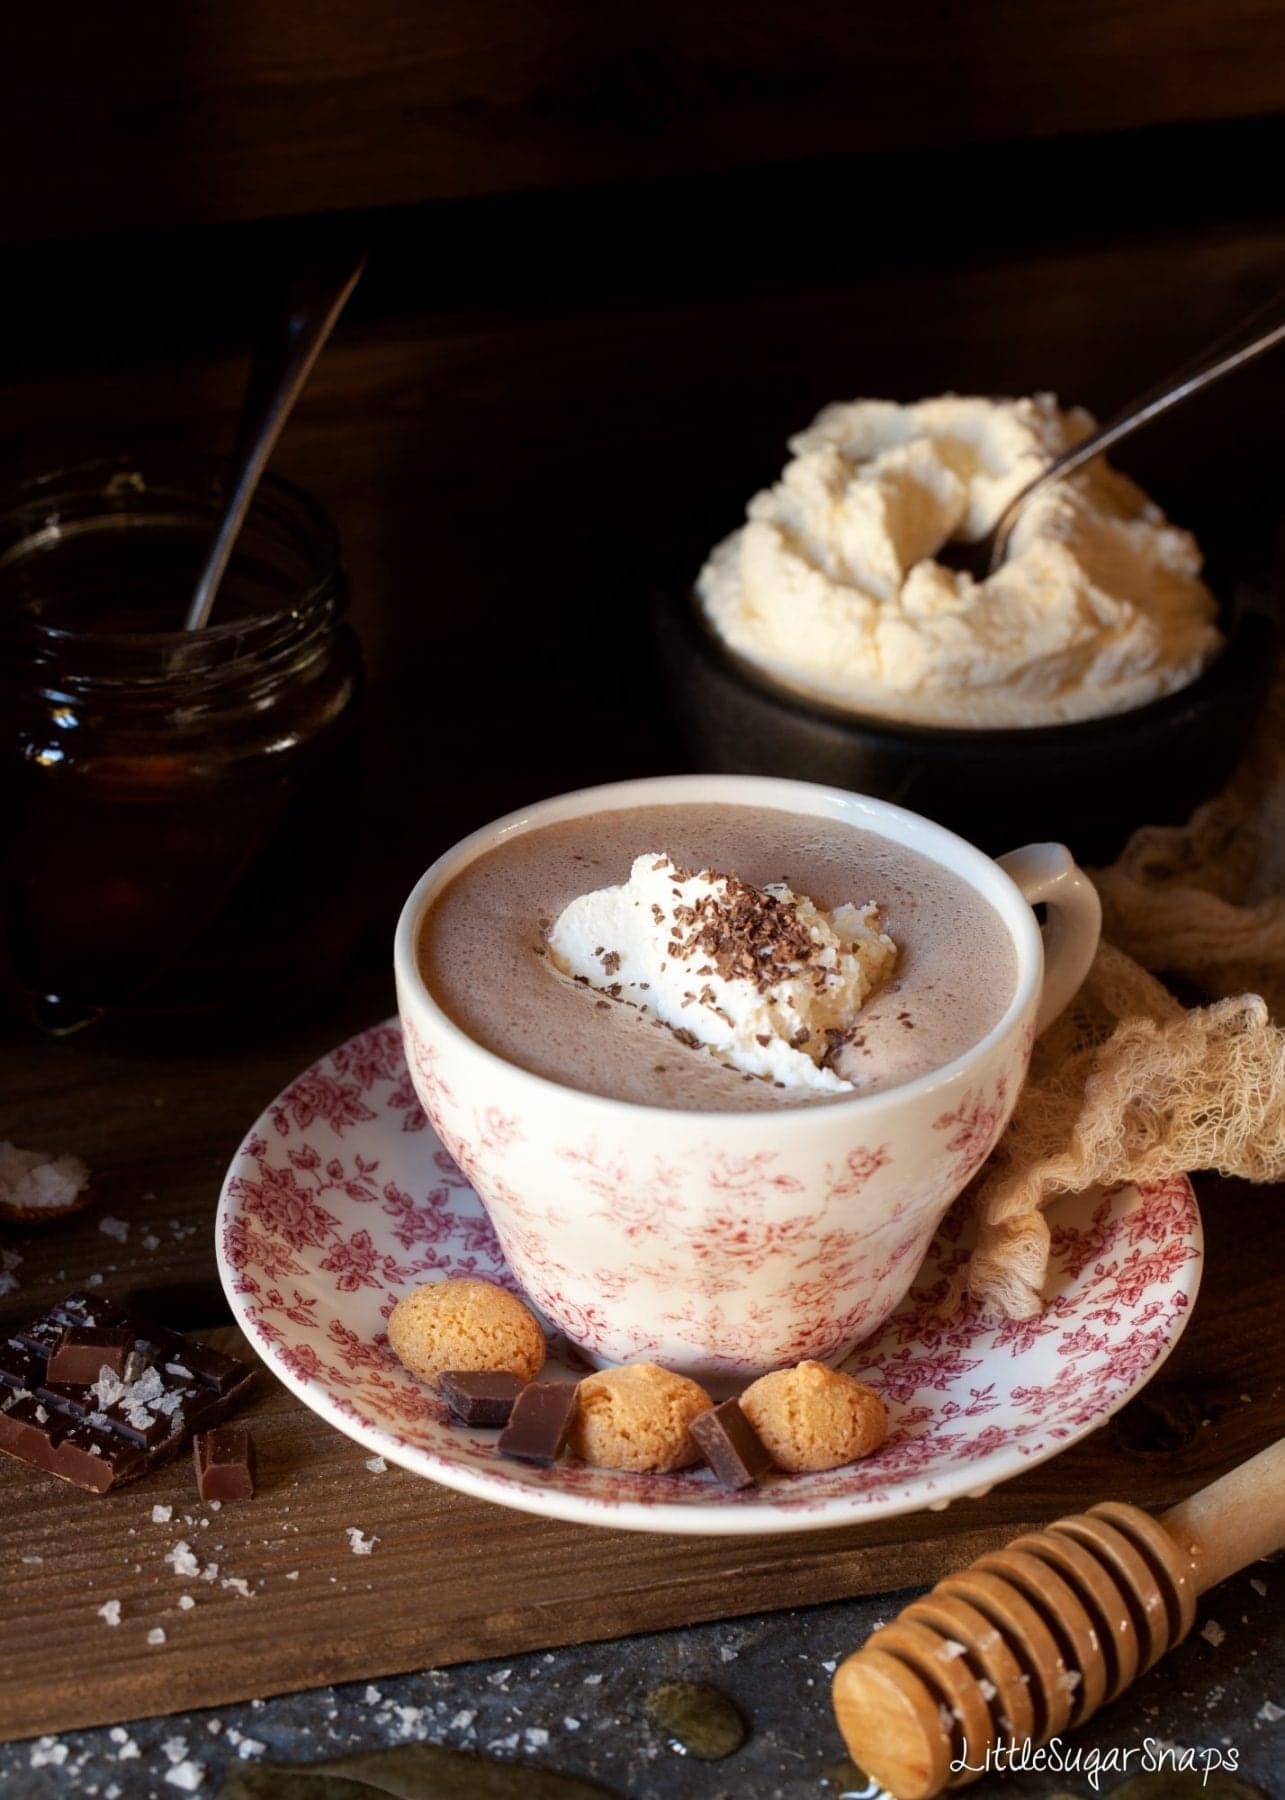 A cup of hot chocolate with cream, chocolate and amaretti cookies.